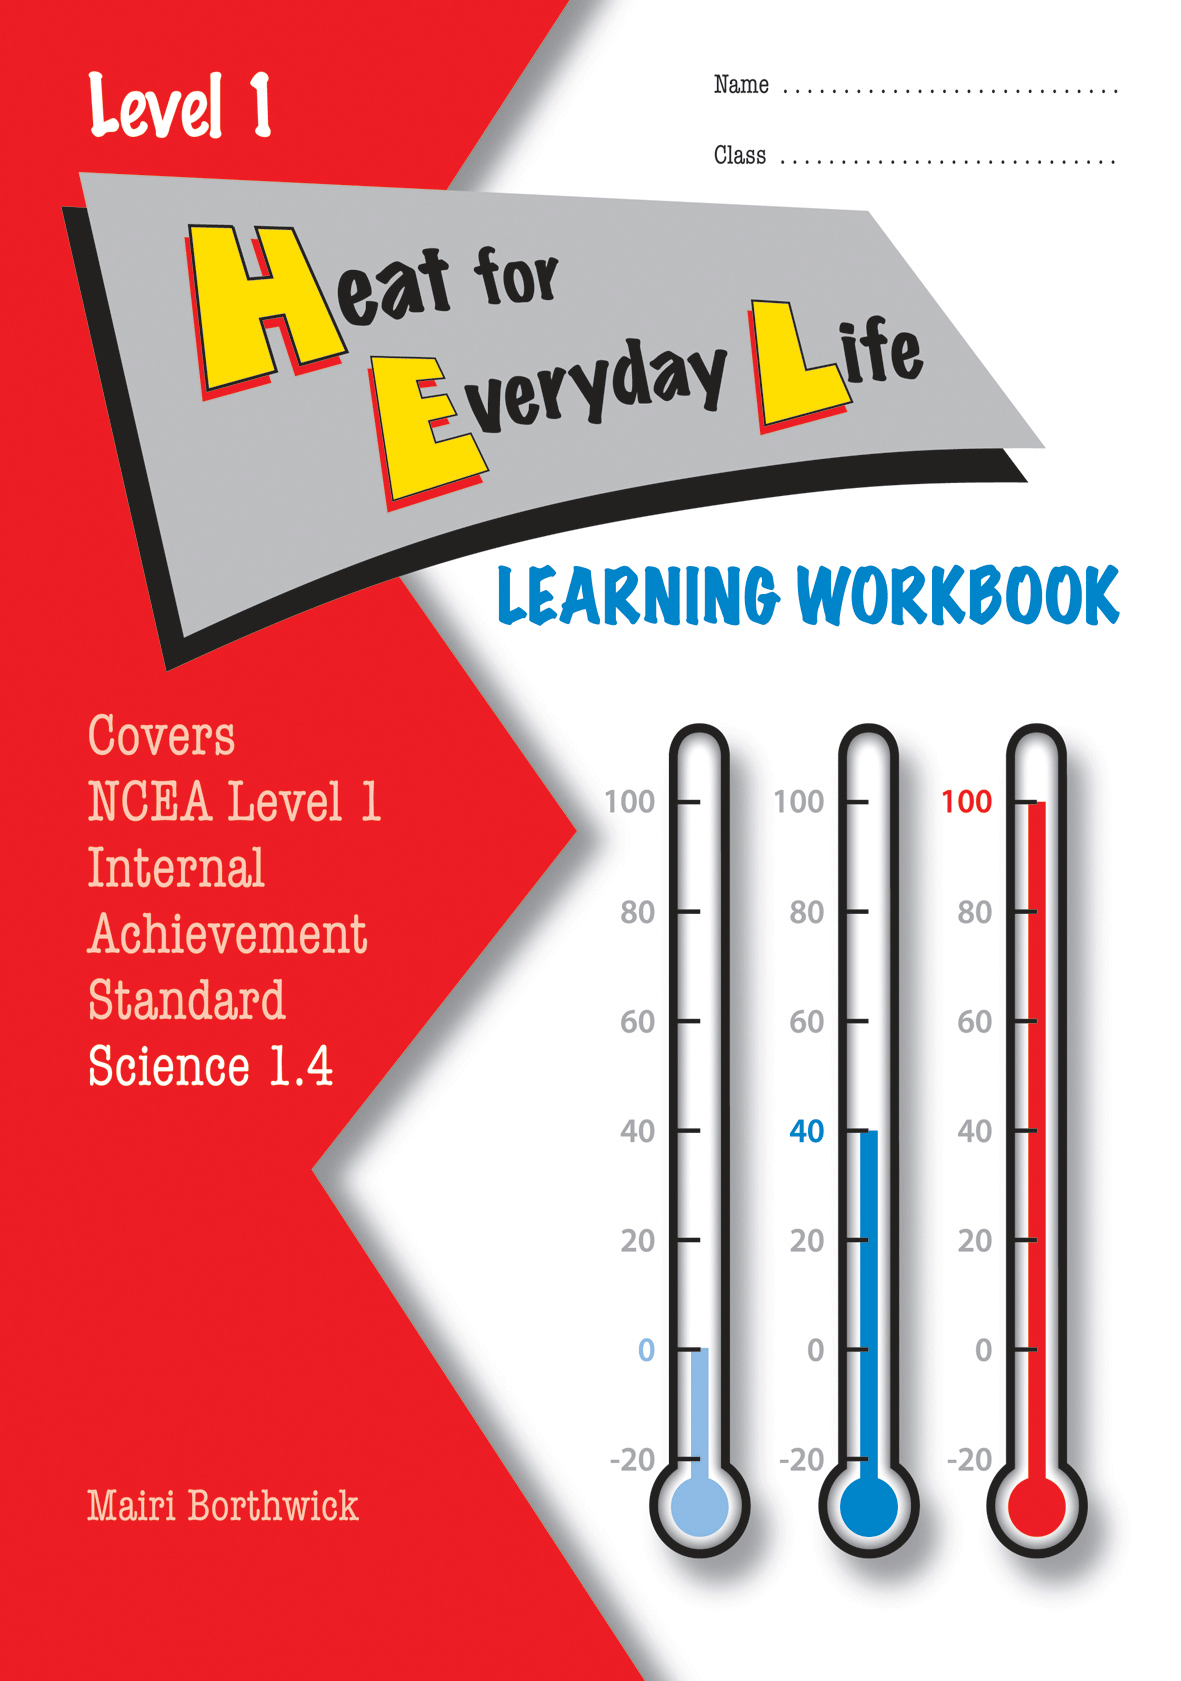 Level 1 Heat for Everyday Life 1.4 Learning Workbook